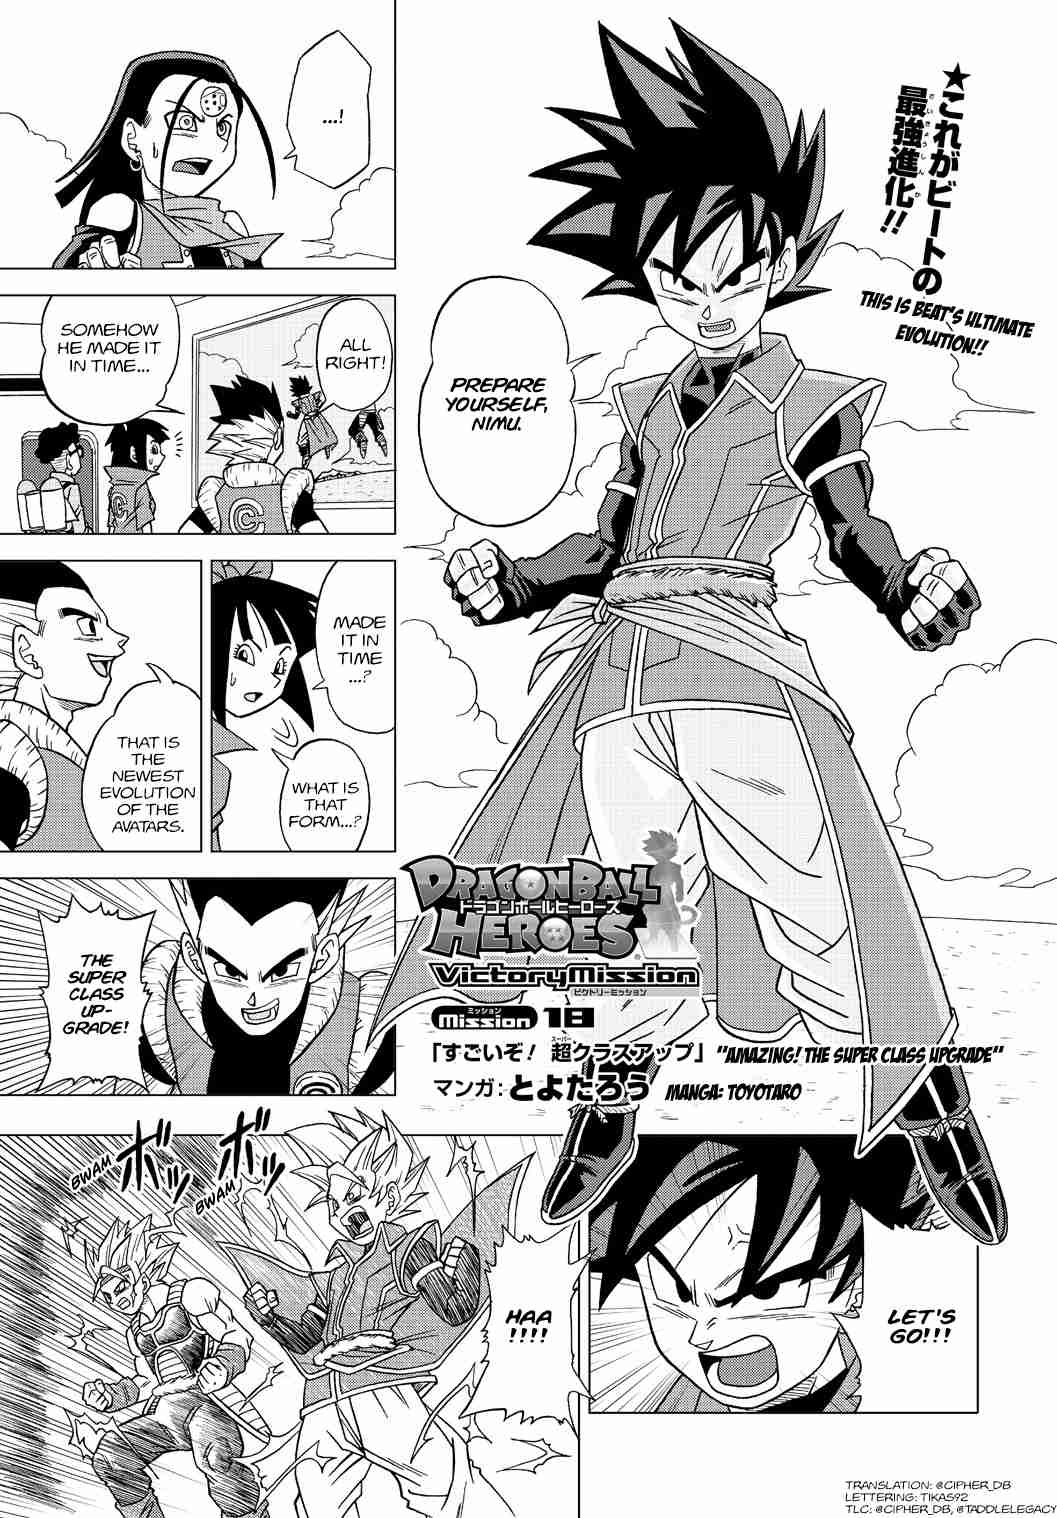 Dragon Ball Heroes Victory Mission Ch. 18 Amazing! The Super Class Upgrade